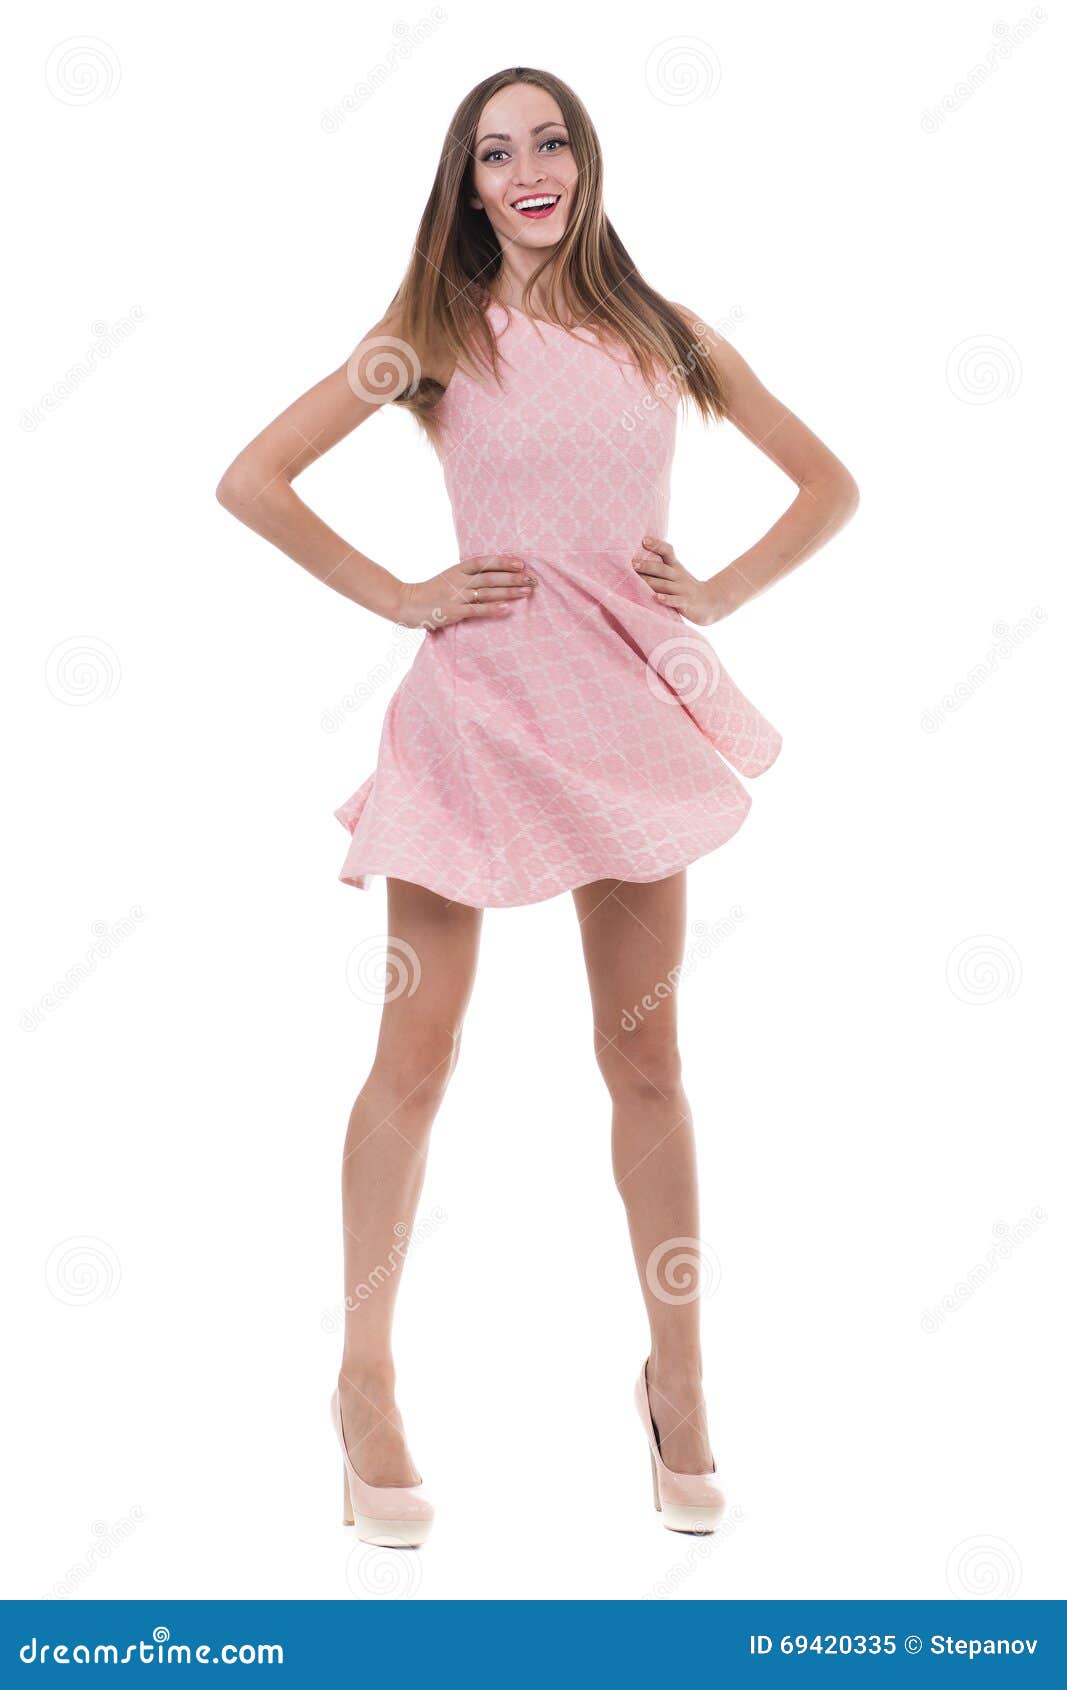 Full Length Of Sensual Woman In Short Dress Dancing Against Isolated ...